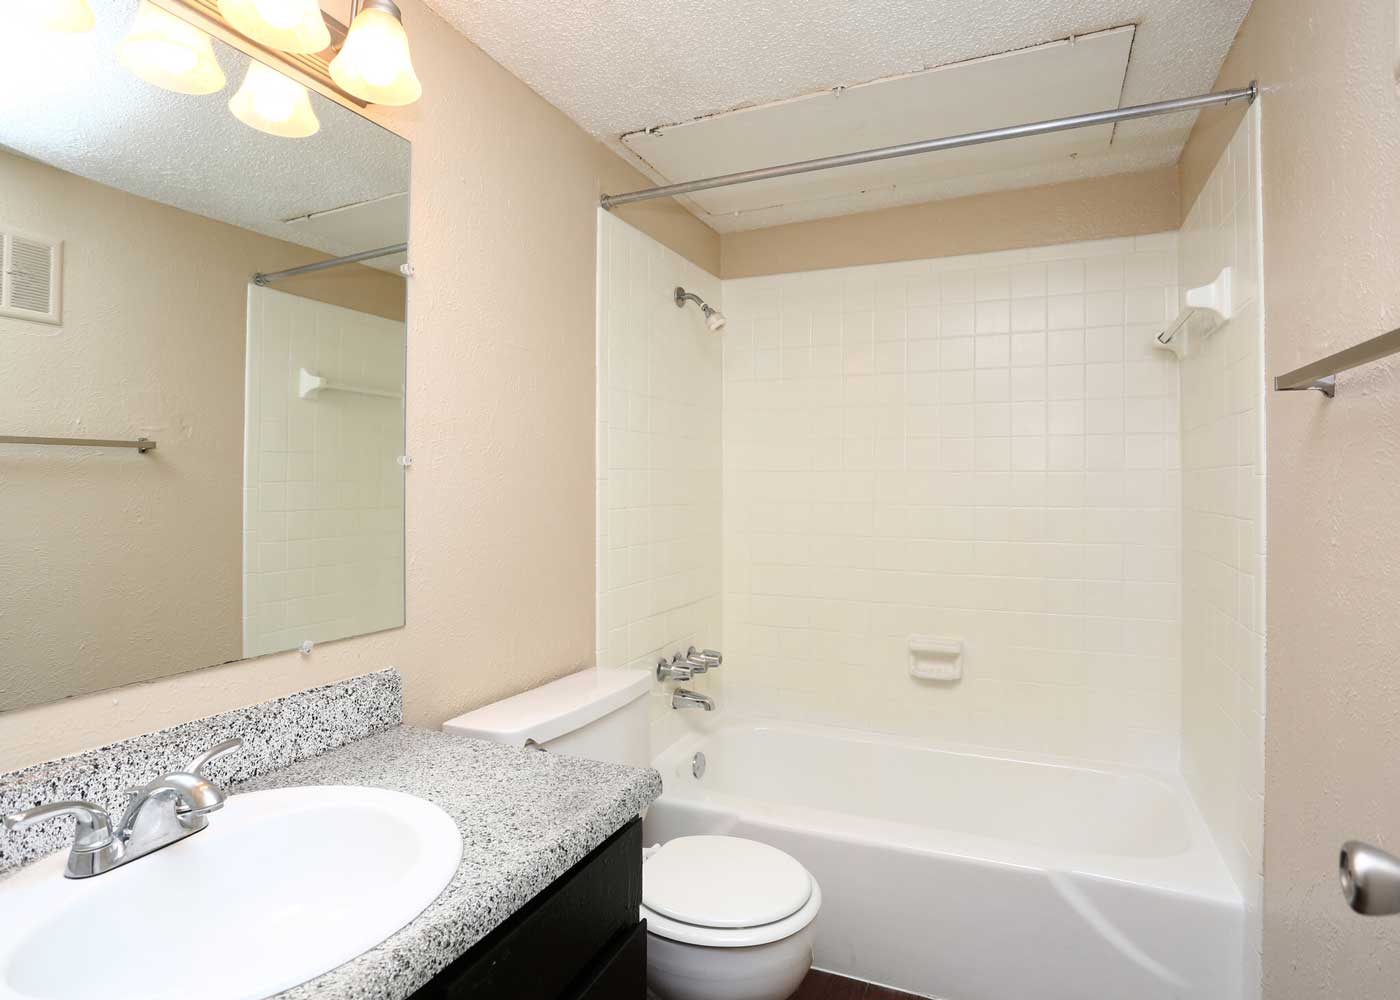 Refined Bathrooms at The Junction Apartments in Arlington, Texas